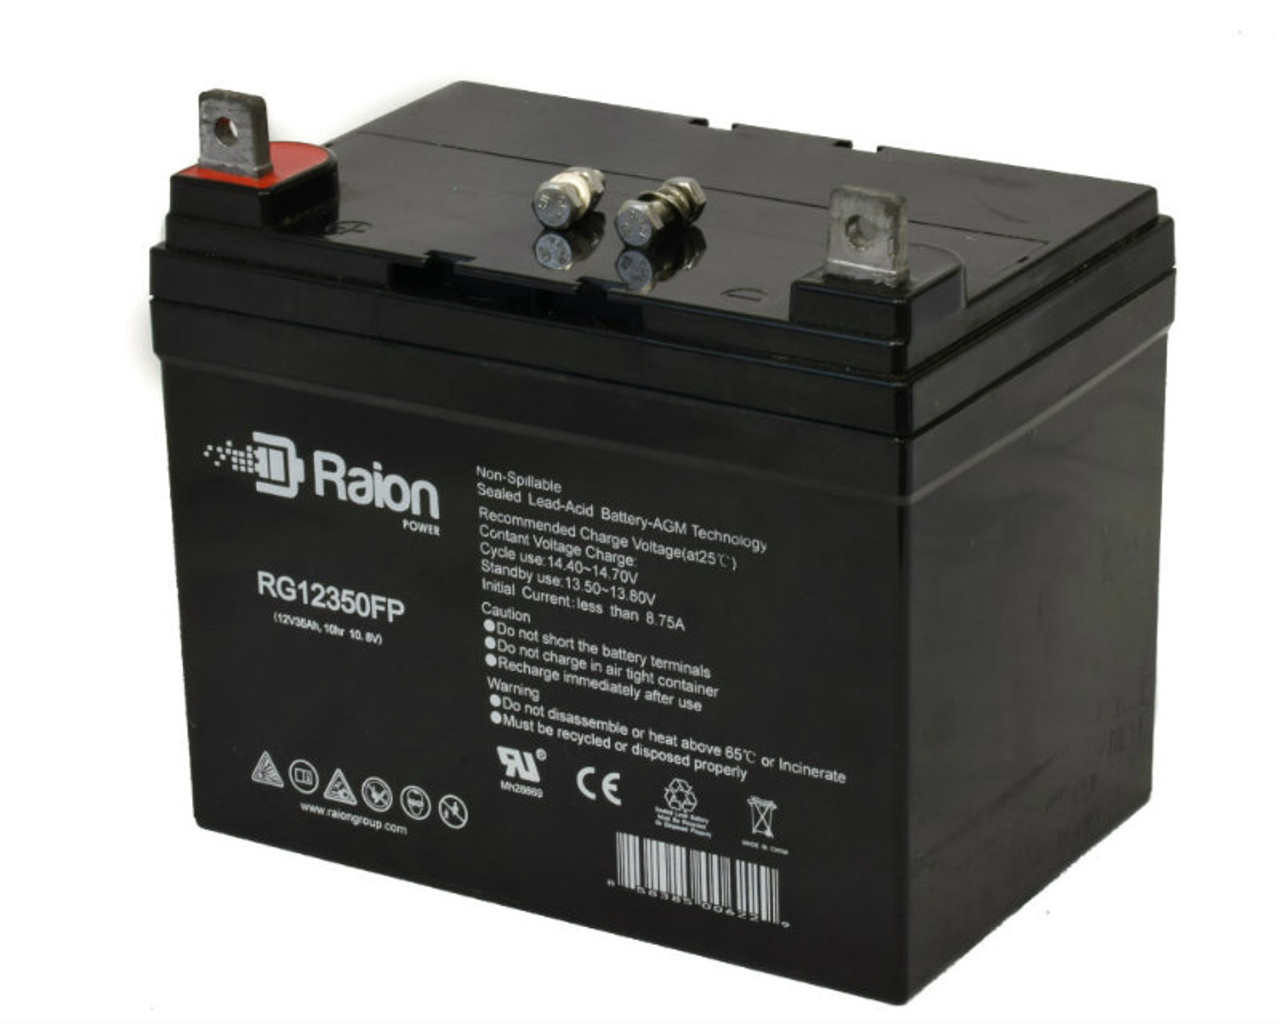 Raion Power Replacement 12V 35Ah Battery for Bosfa DC12-33 - 1 Pack